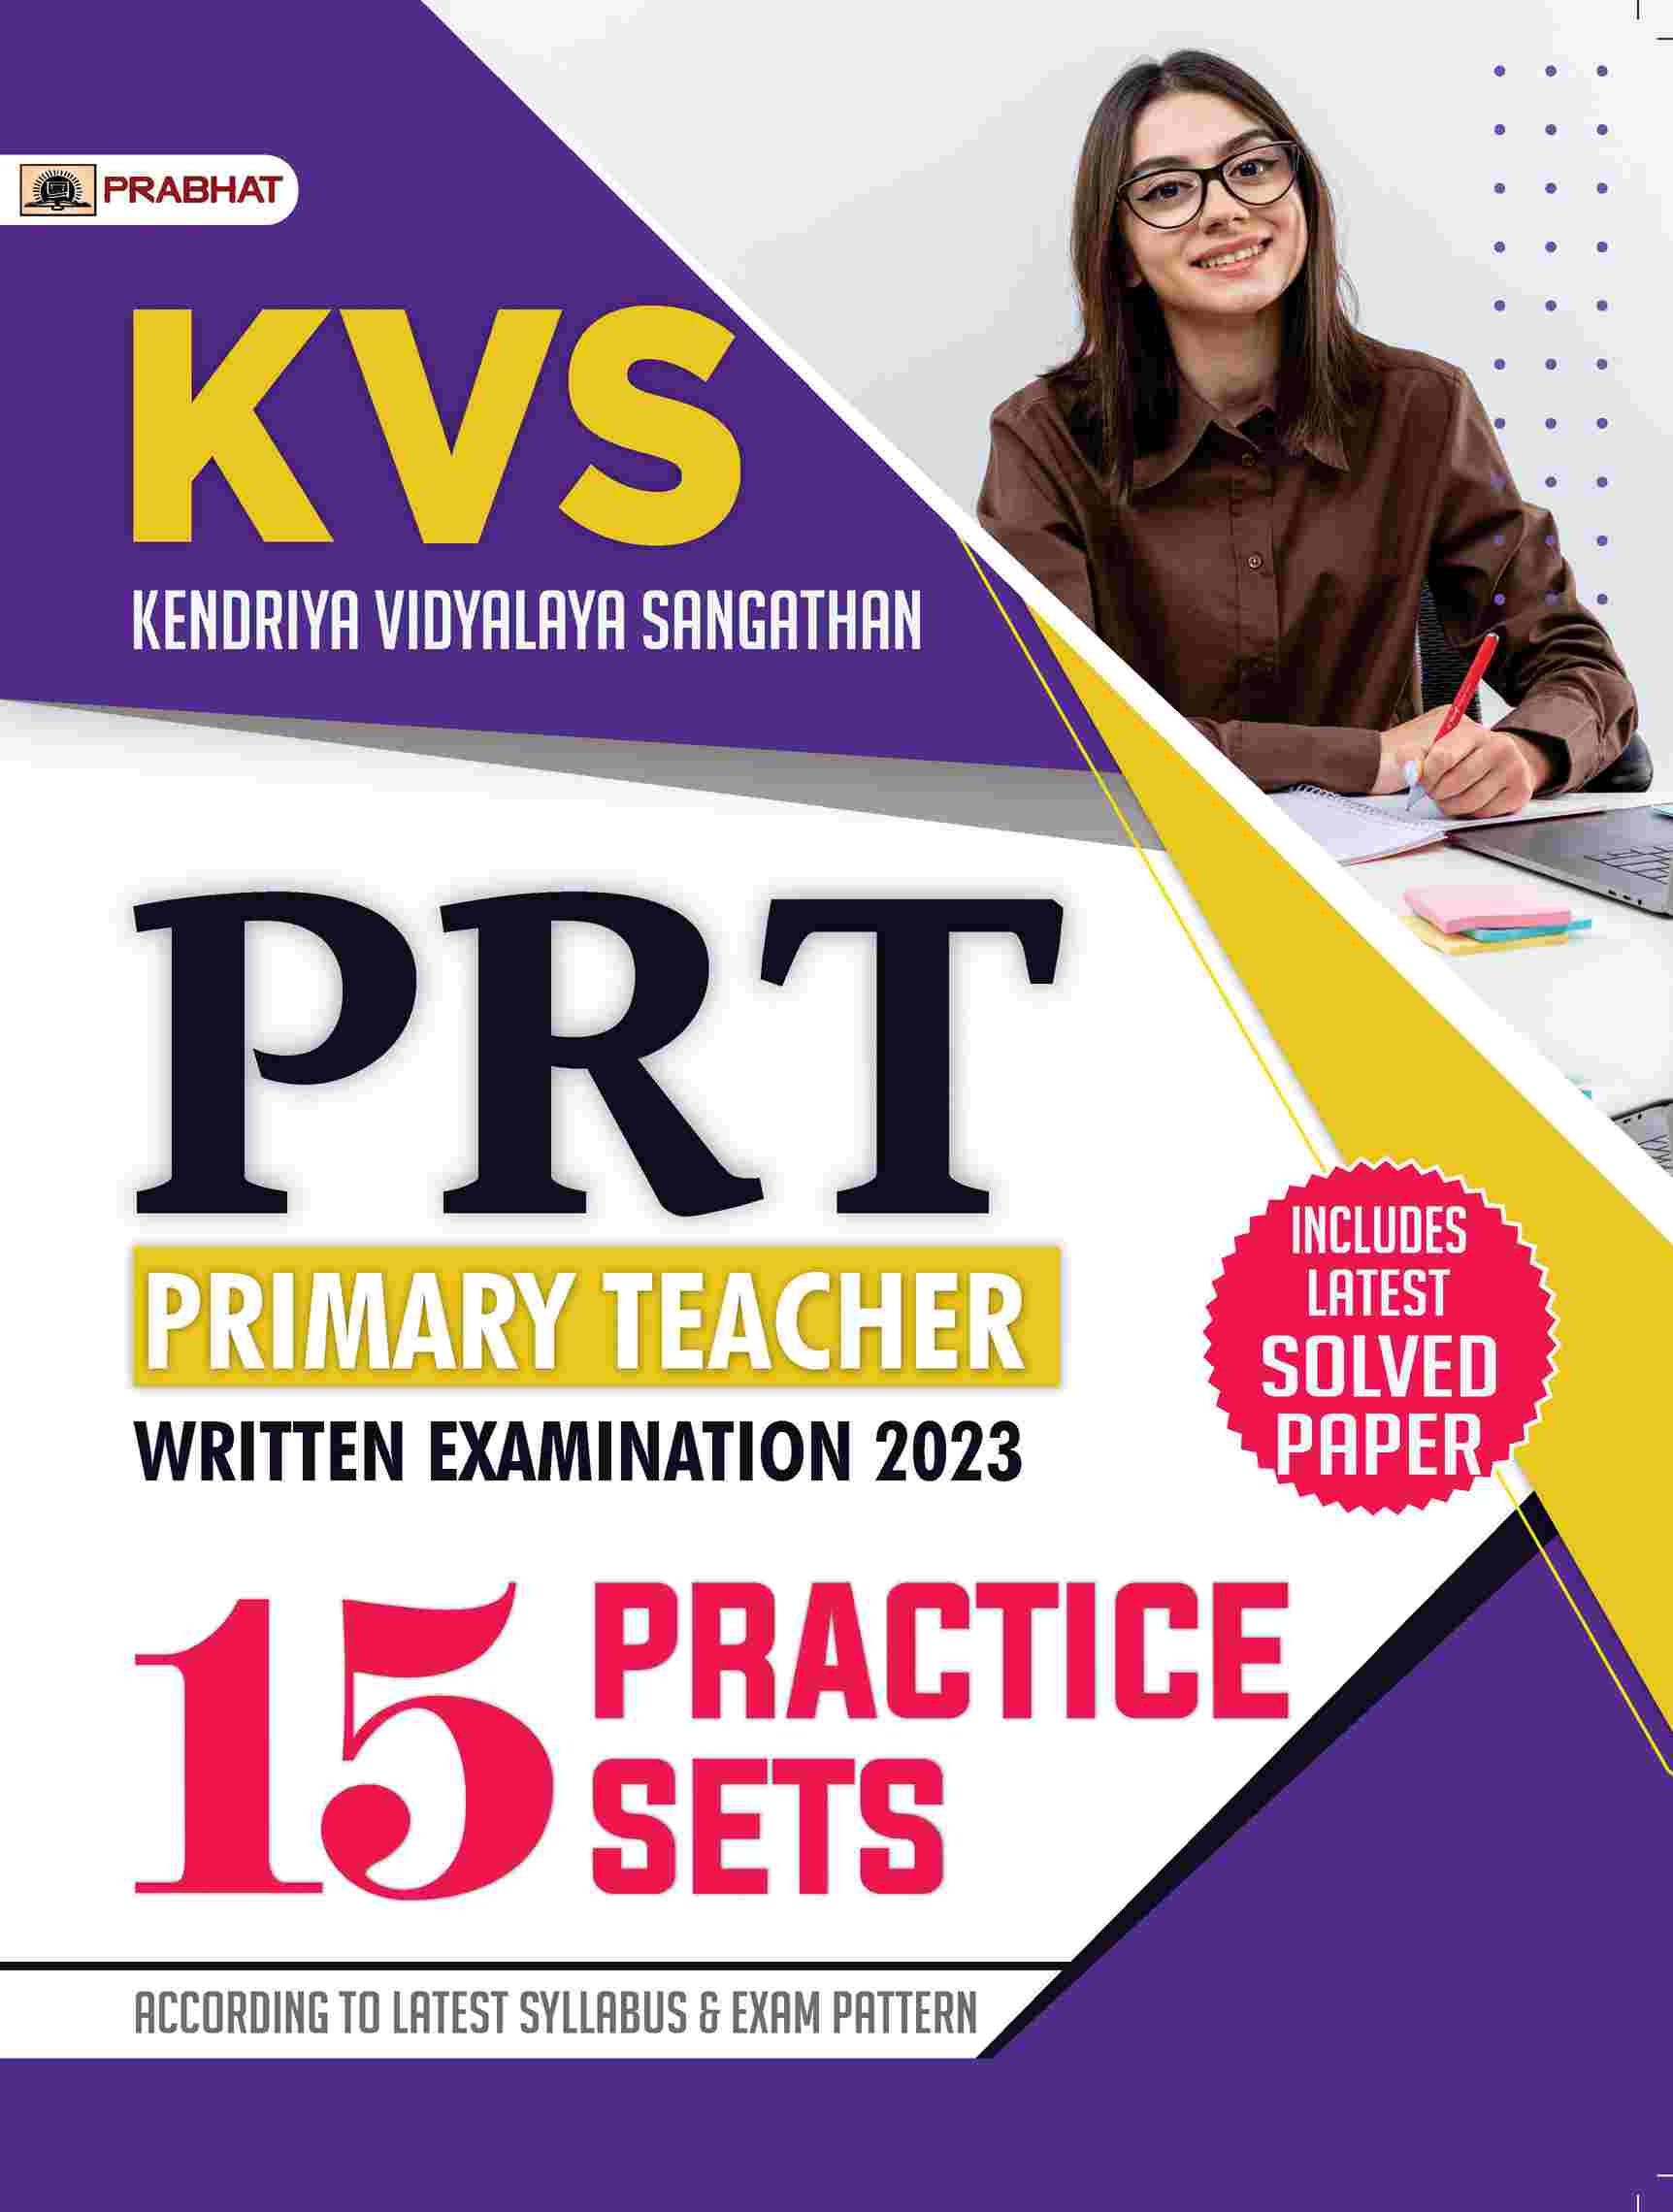 KVS PRT Primary Teacher Written Examination 2023 15 Practice Sets includes Latest Solved Paper